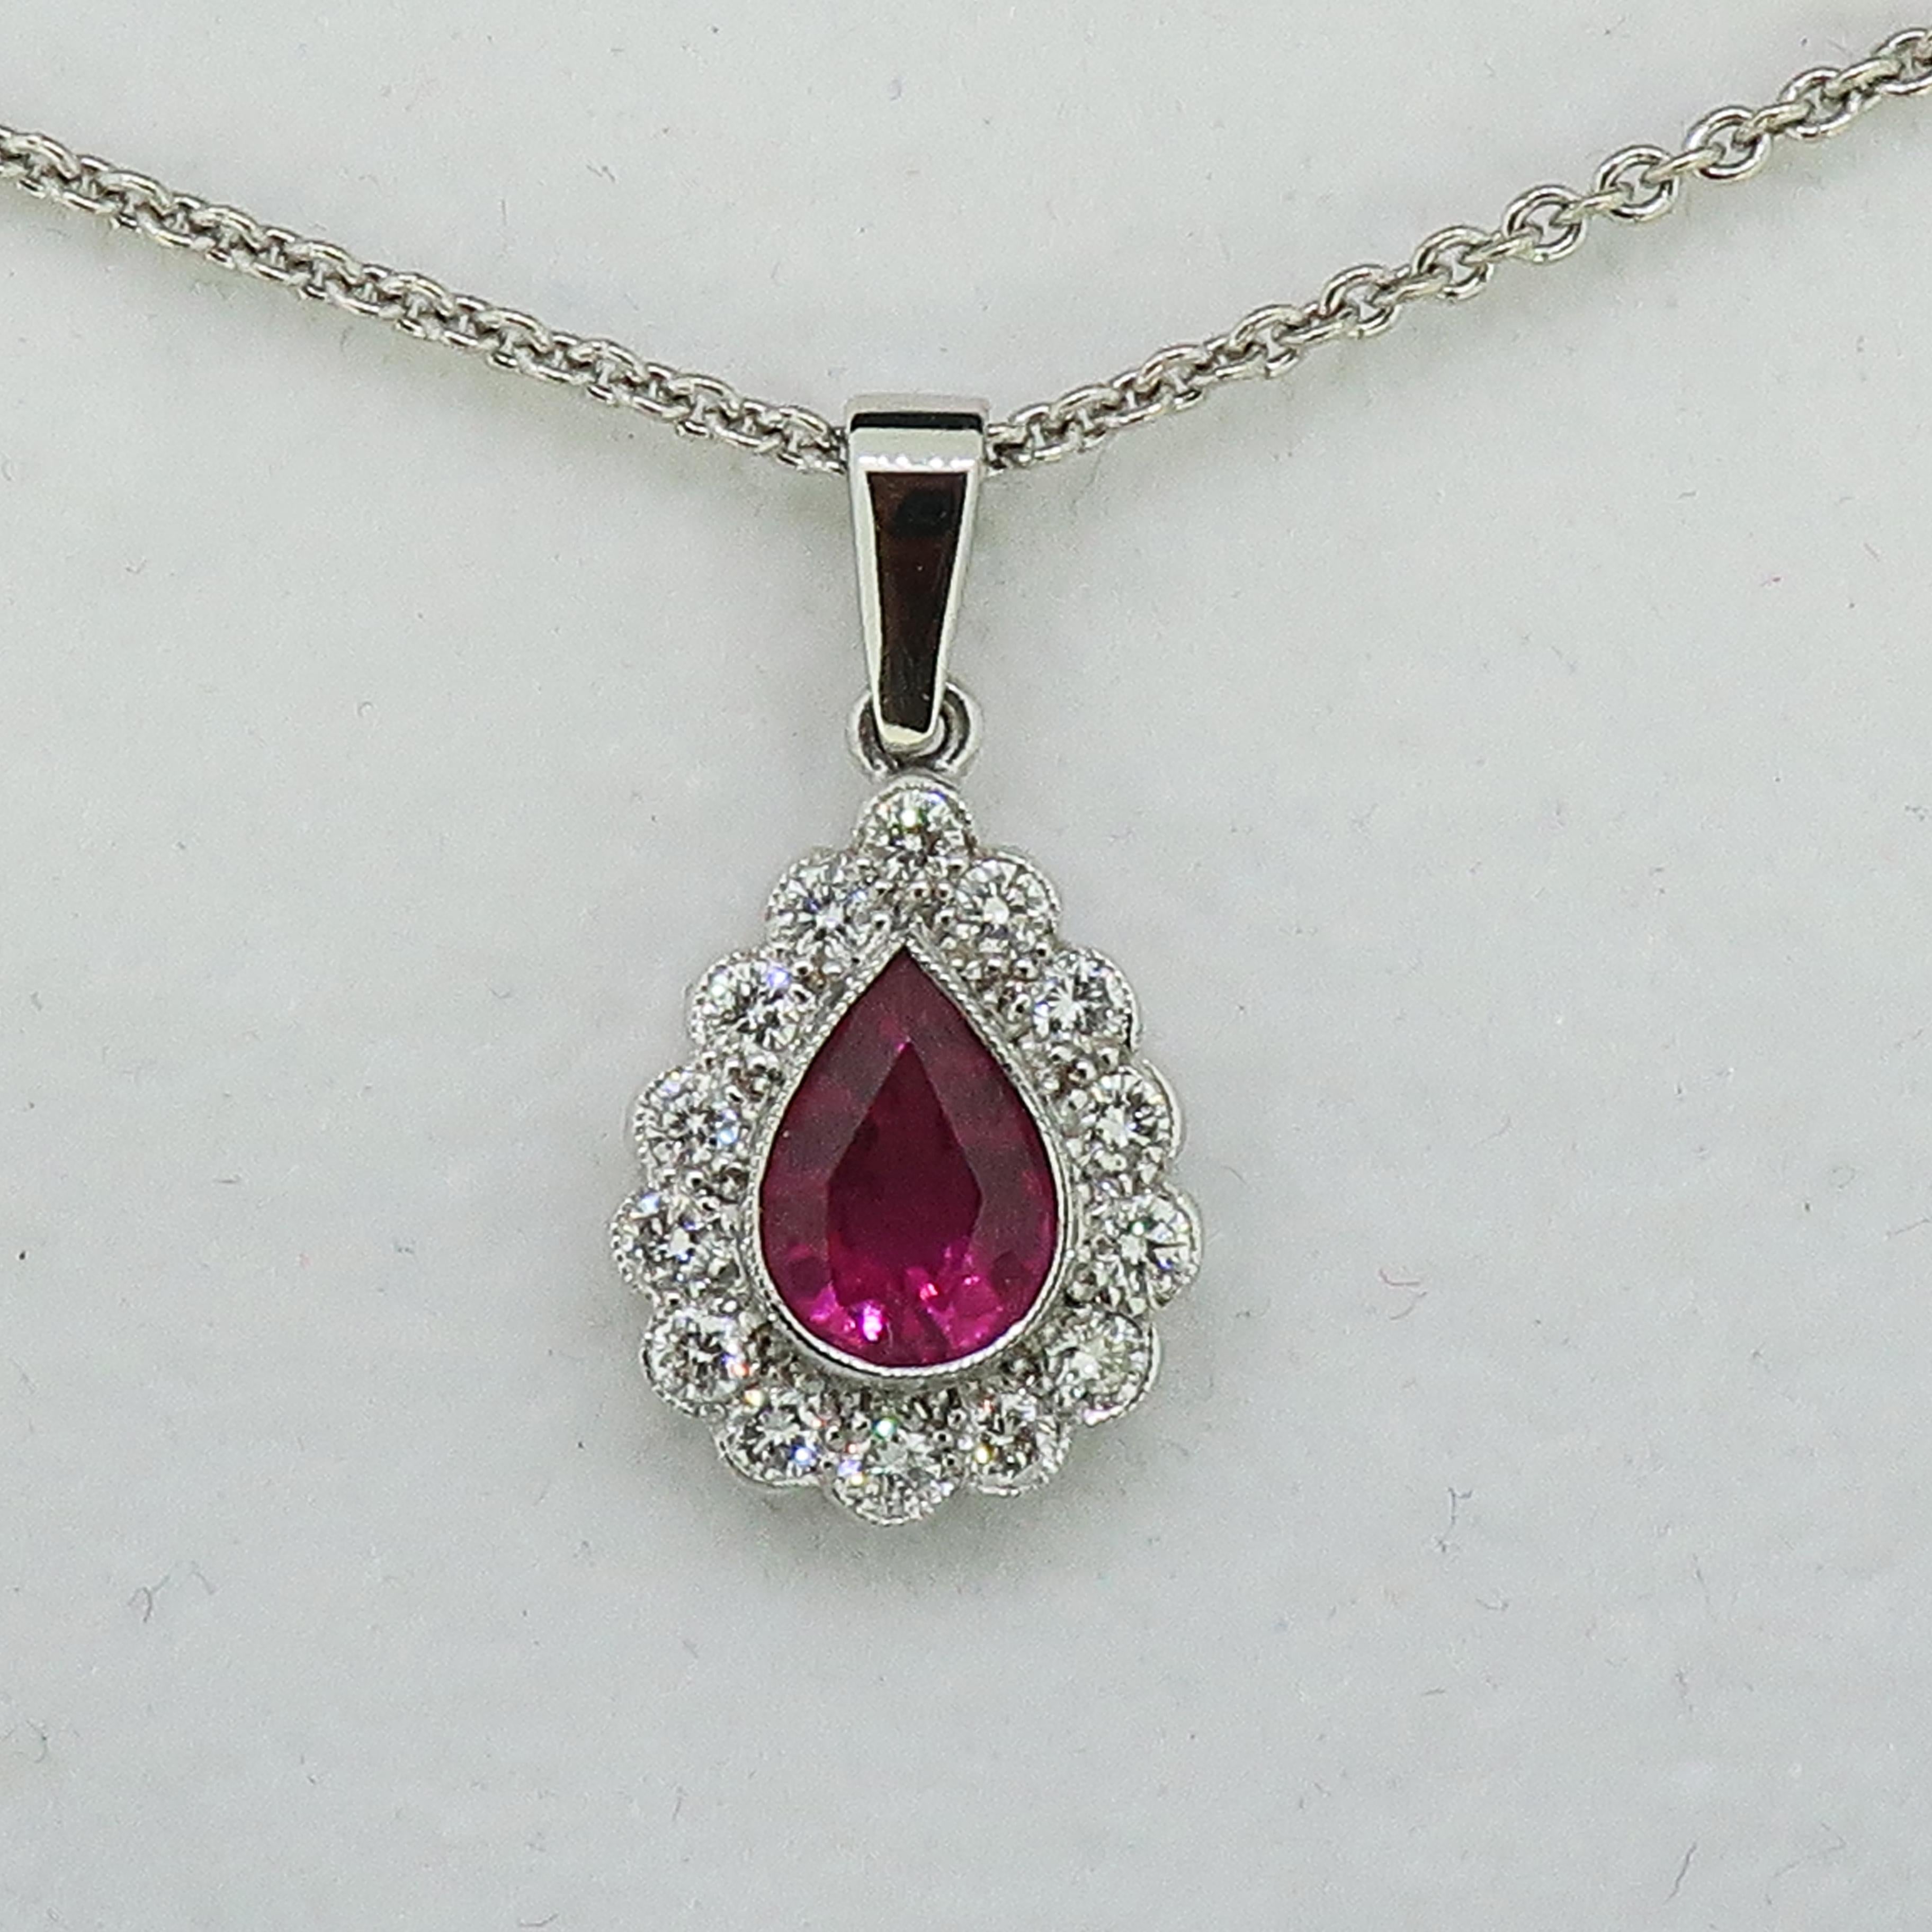 Rubellite and Diamond Pendant 18 Karat White Gold 

Vibrant pink rubellite and diamond pendant. Bright pink pear shape tourmaline / rubellite measuring 7.5mm x 5.3mm, encased in a white gold setting, surrounded by fourteen white brilliant cut